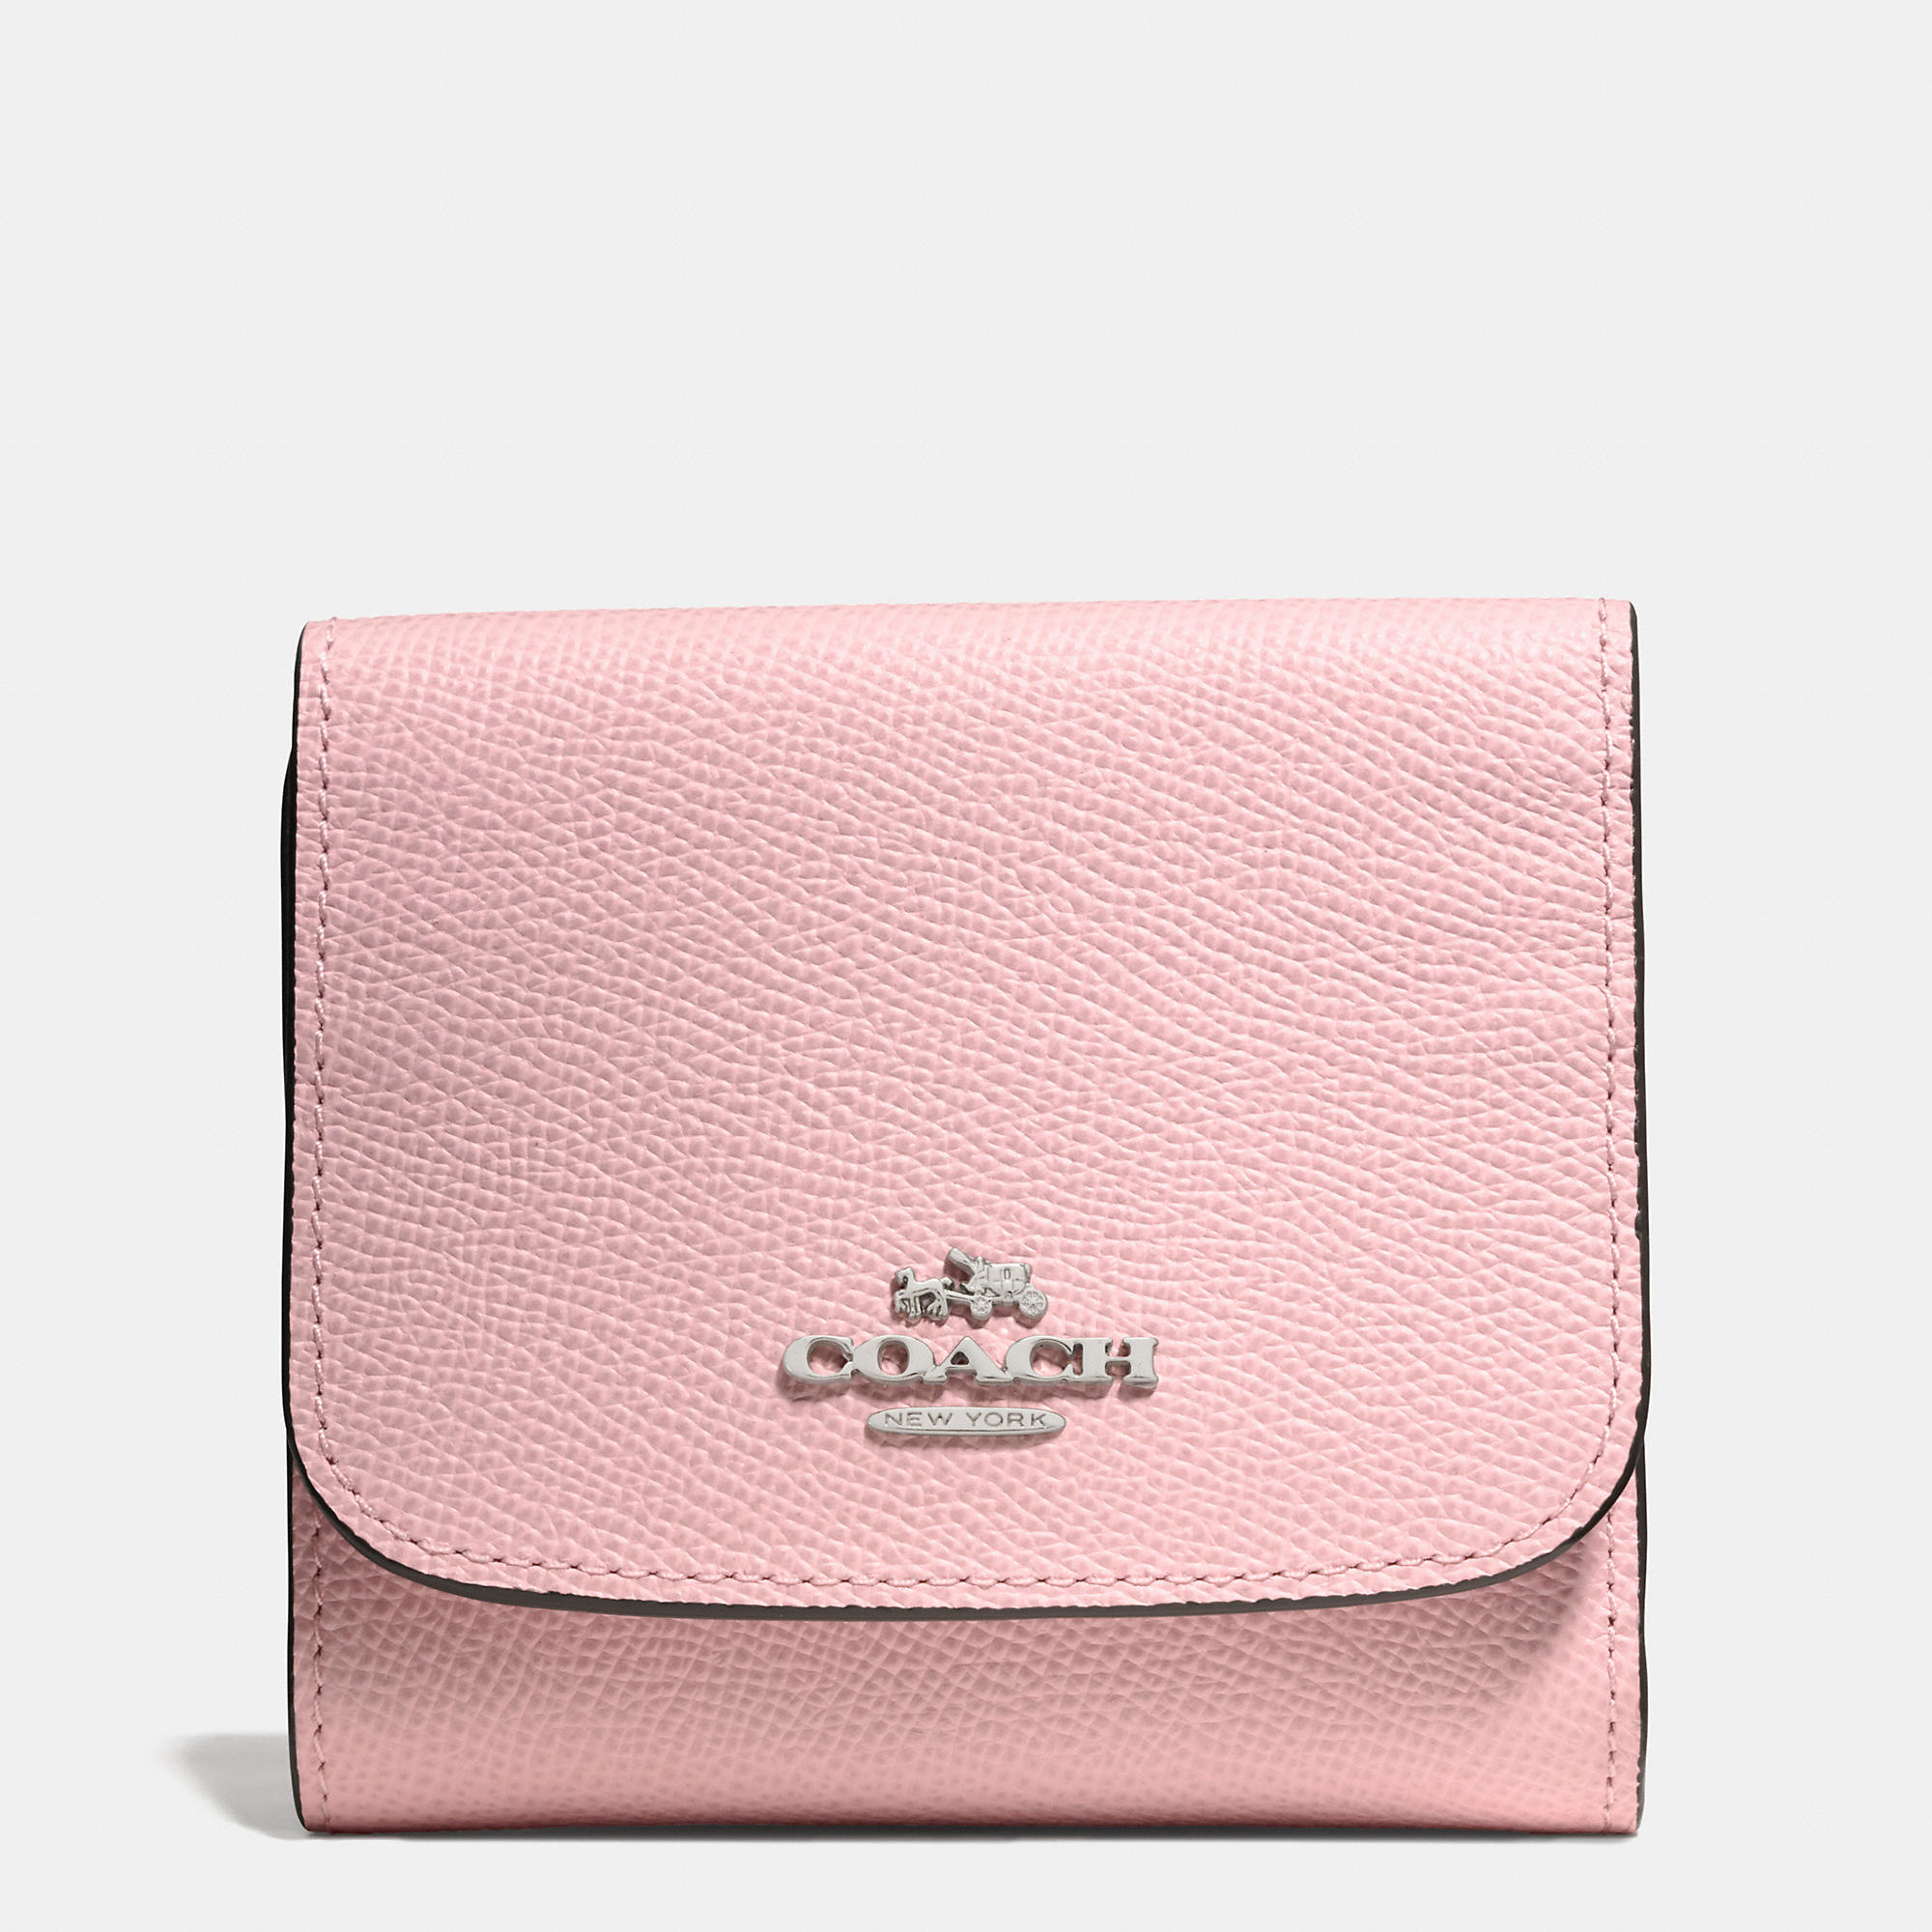 Lyst - Coach Small Wallet In Crossgrain Leather in Pink